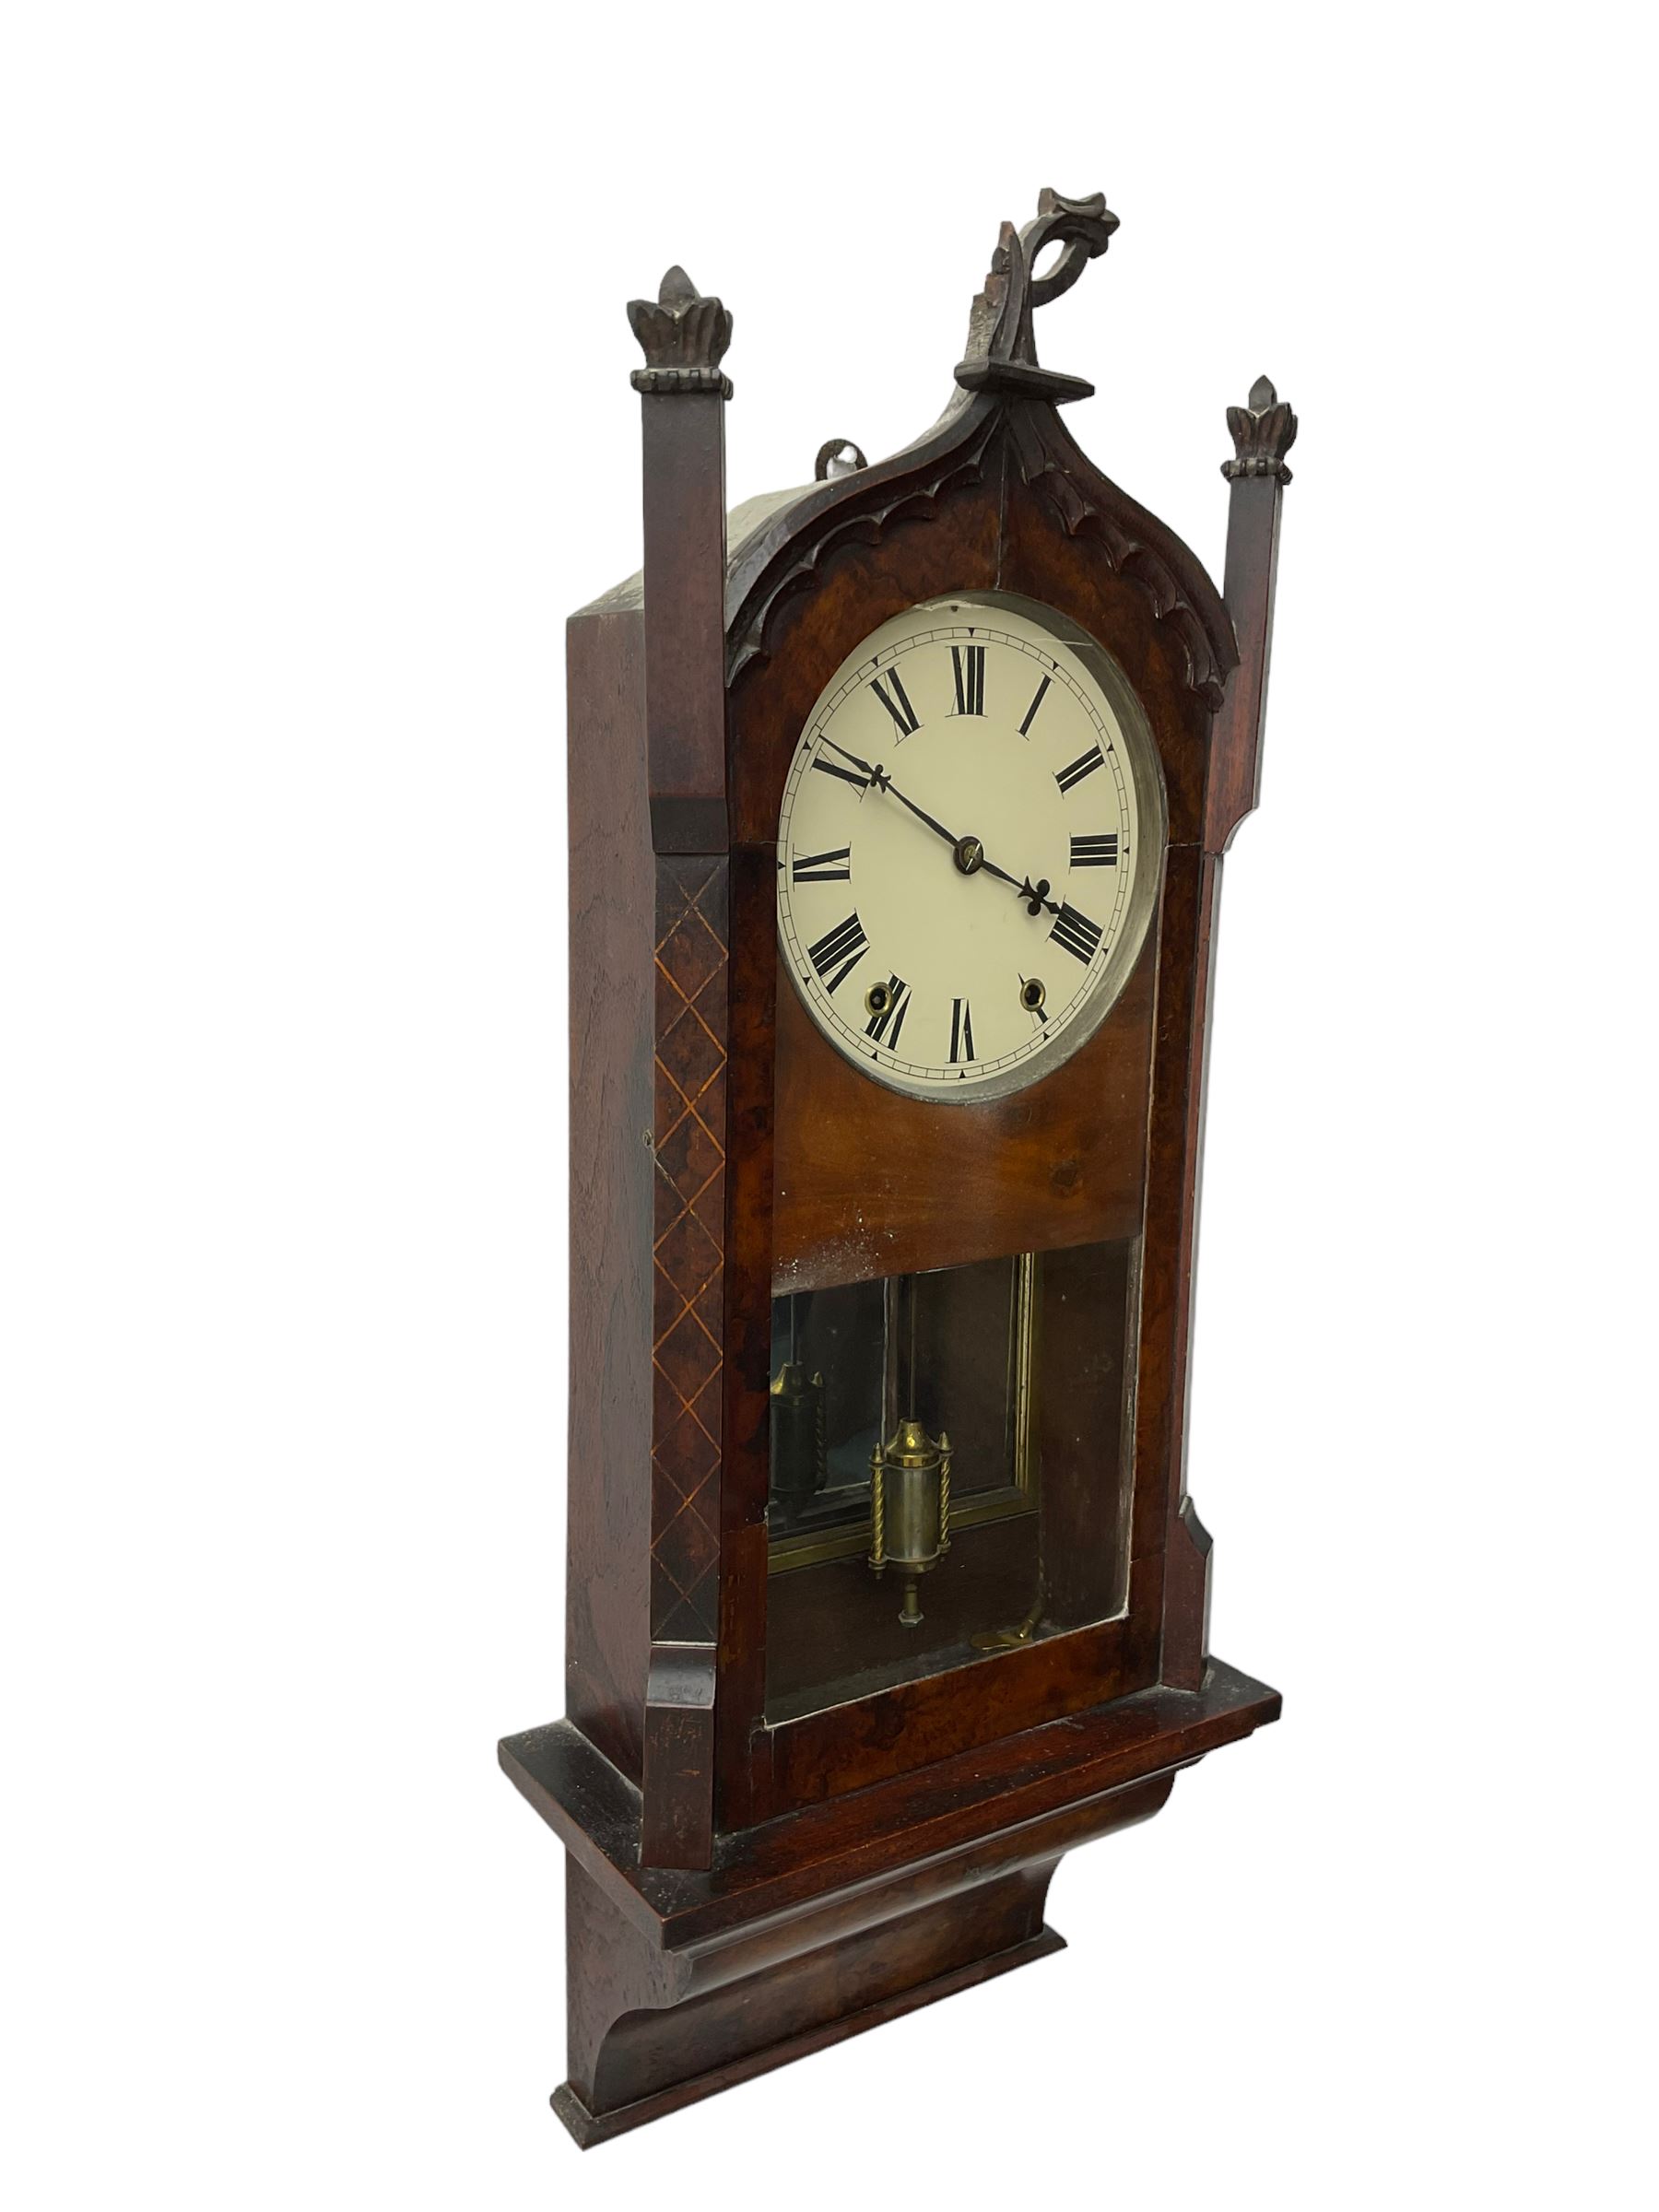 American - late 19th century 8 day wall clock - Image 2 of 3